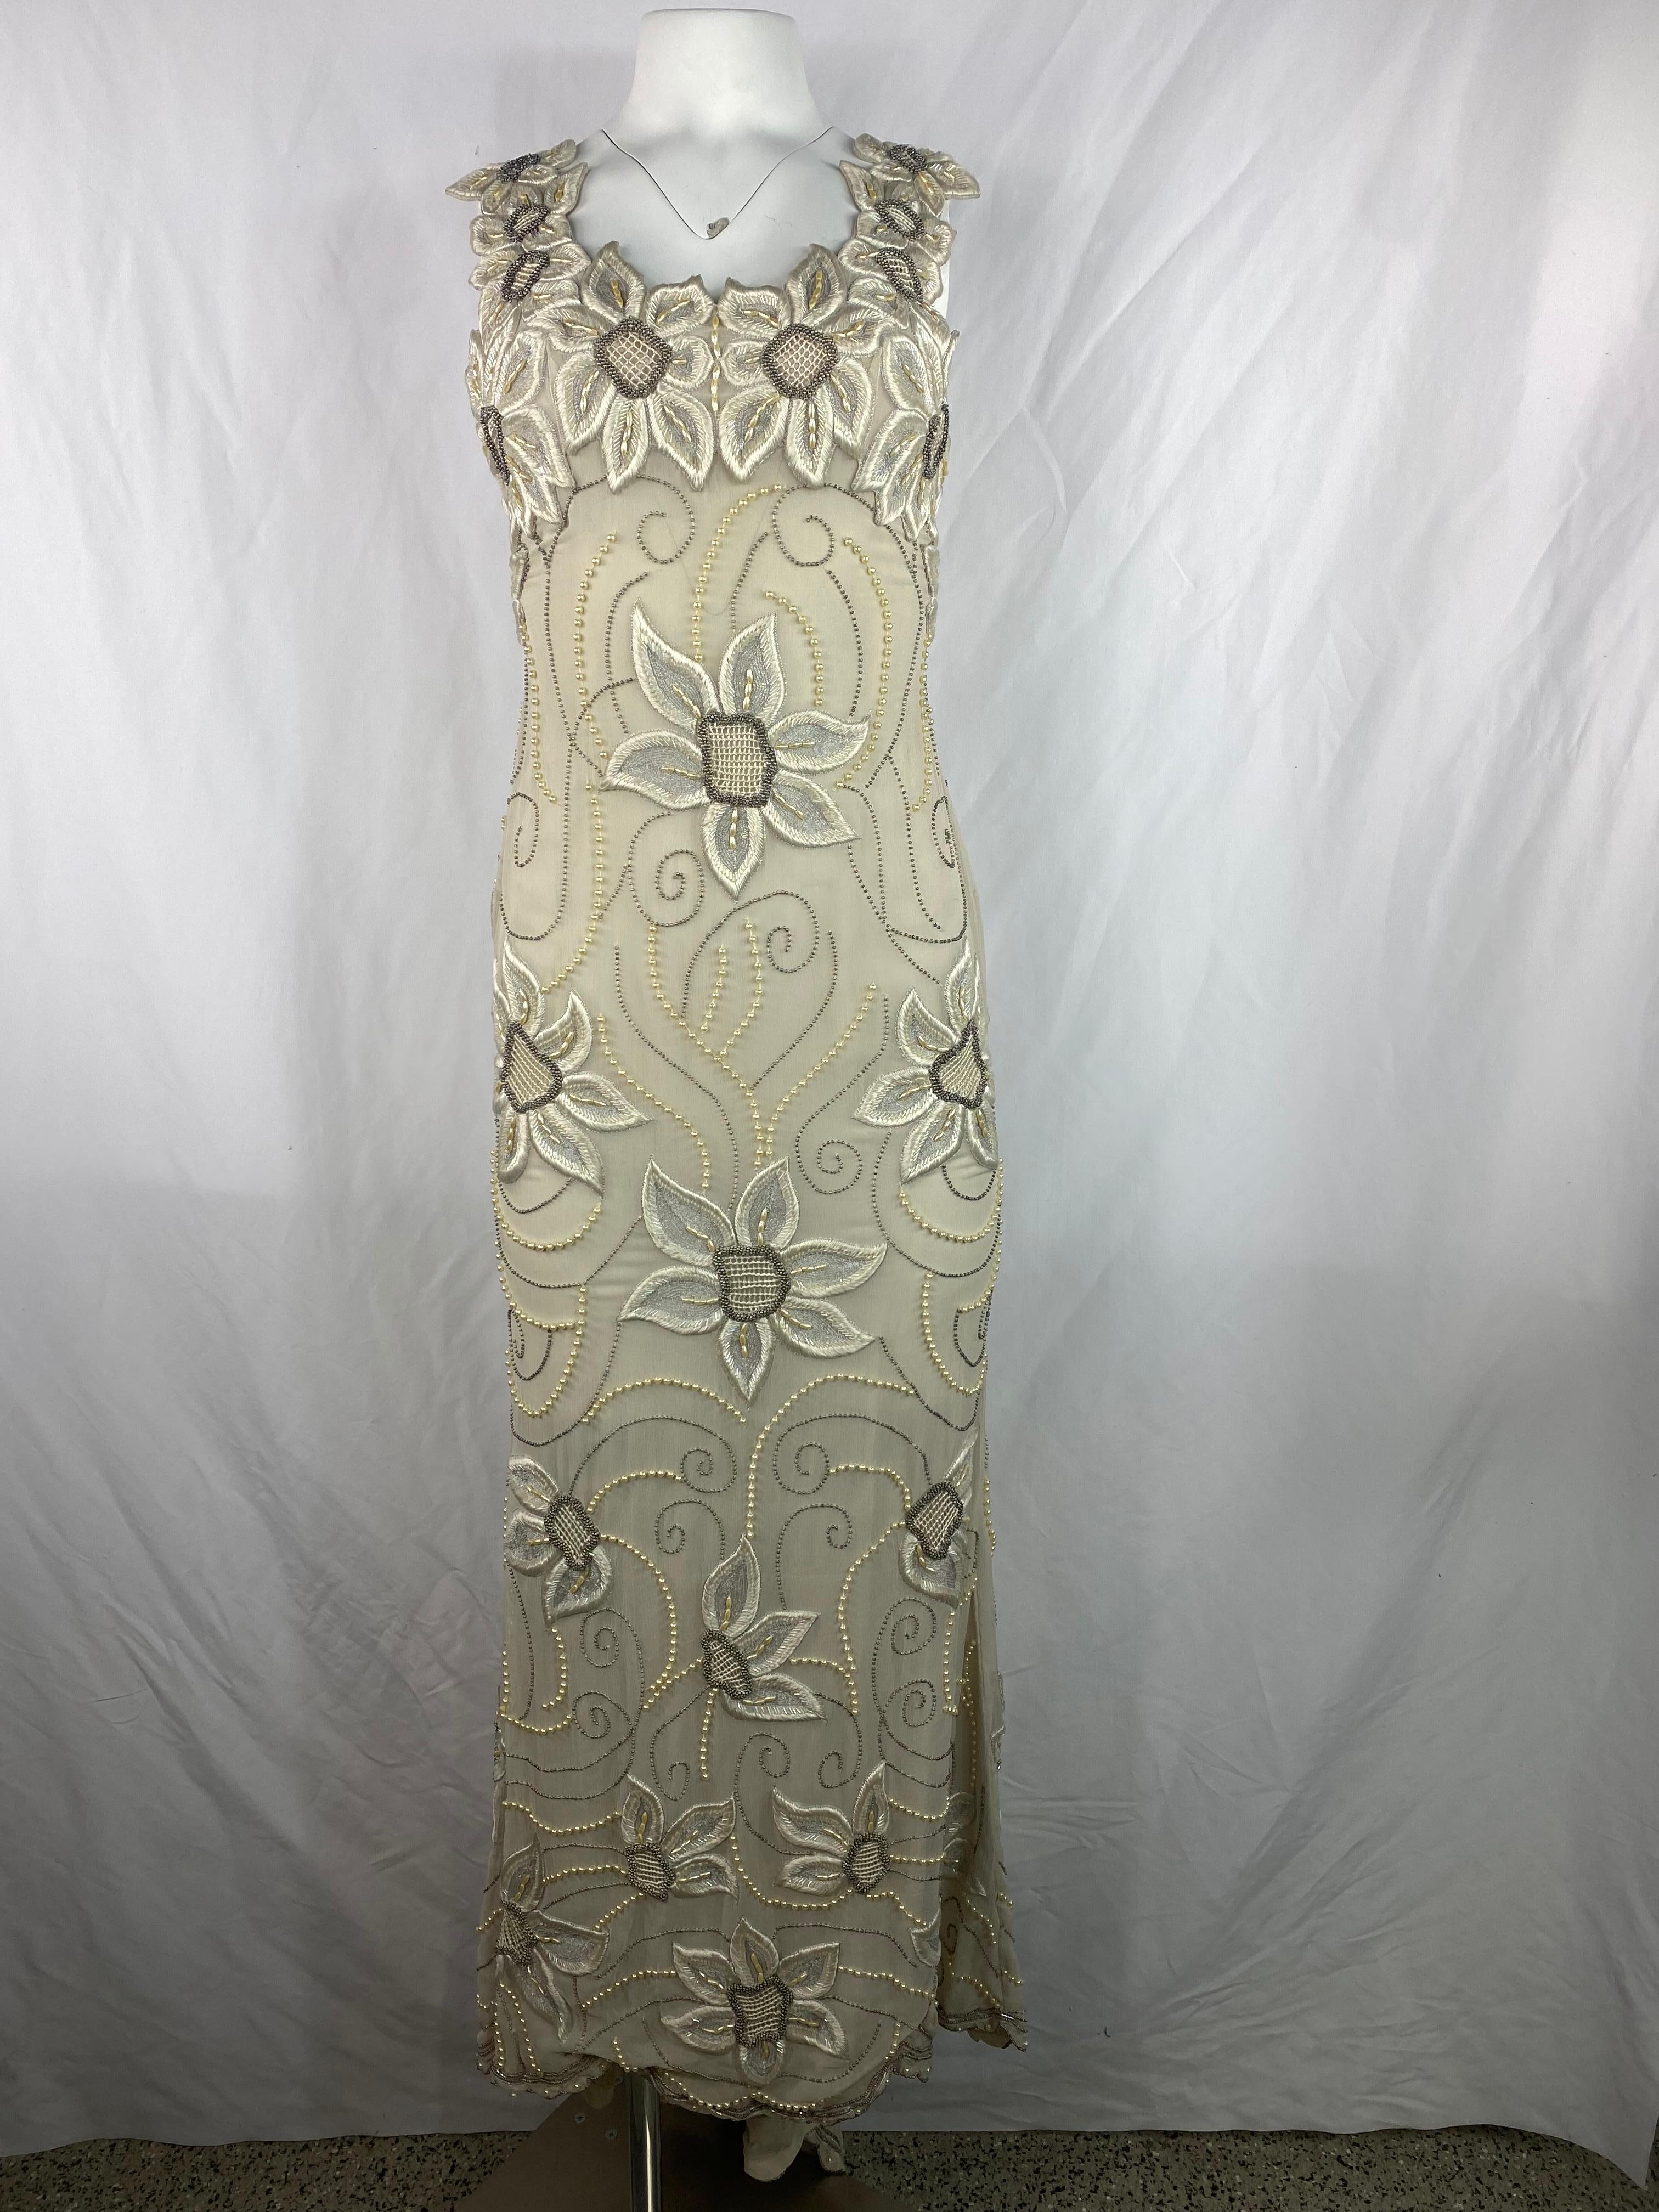 Product details:

The dress is made out of 100% silk, beads and pearls. It features cream, beige, brown and white colors, floral embroidered motif. The front measures 55 inches long and the back is 64 inches long.